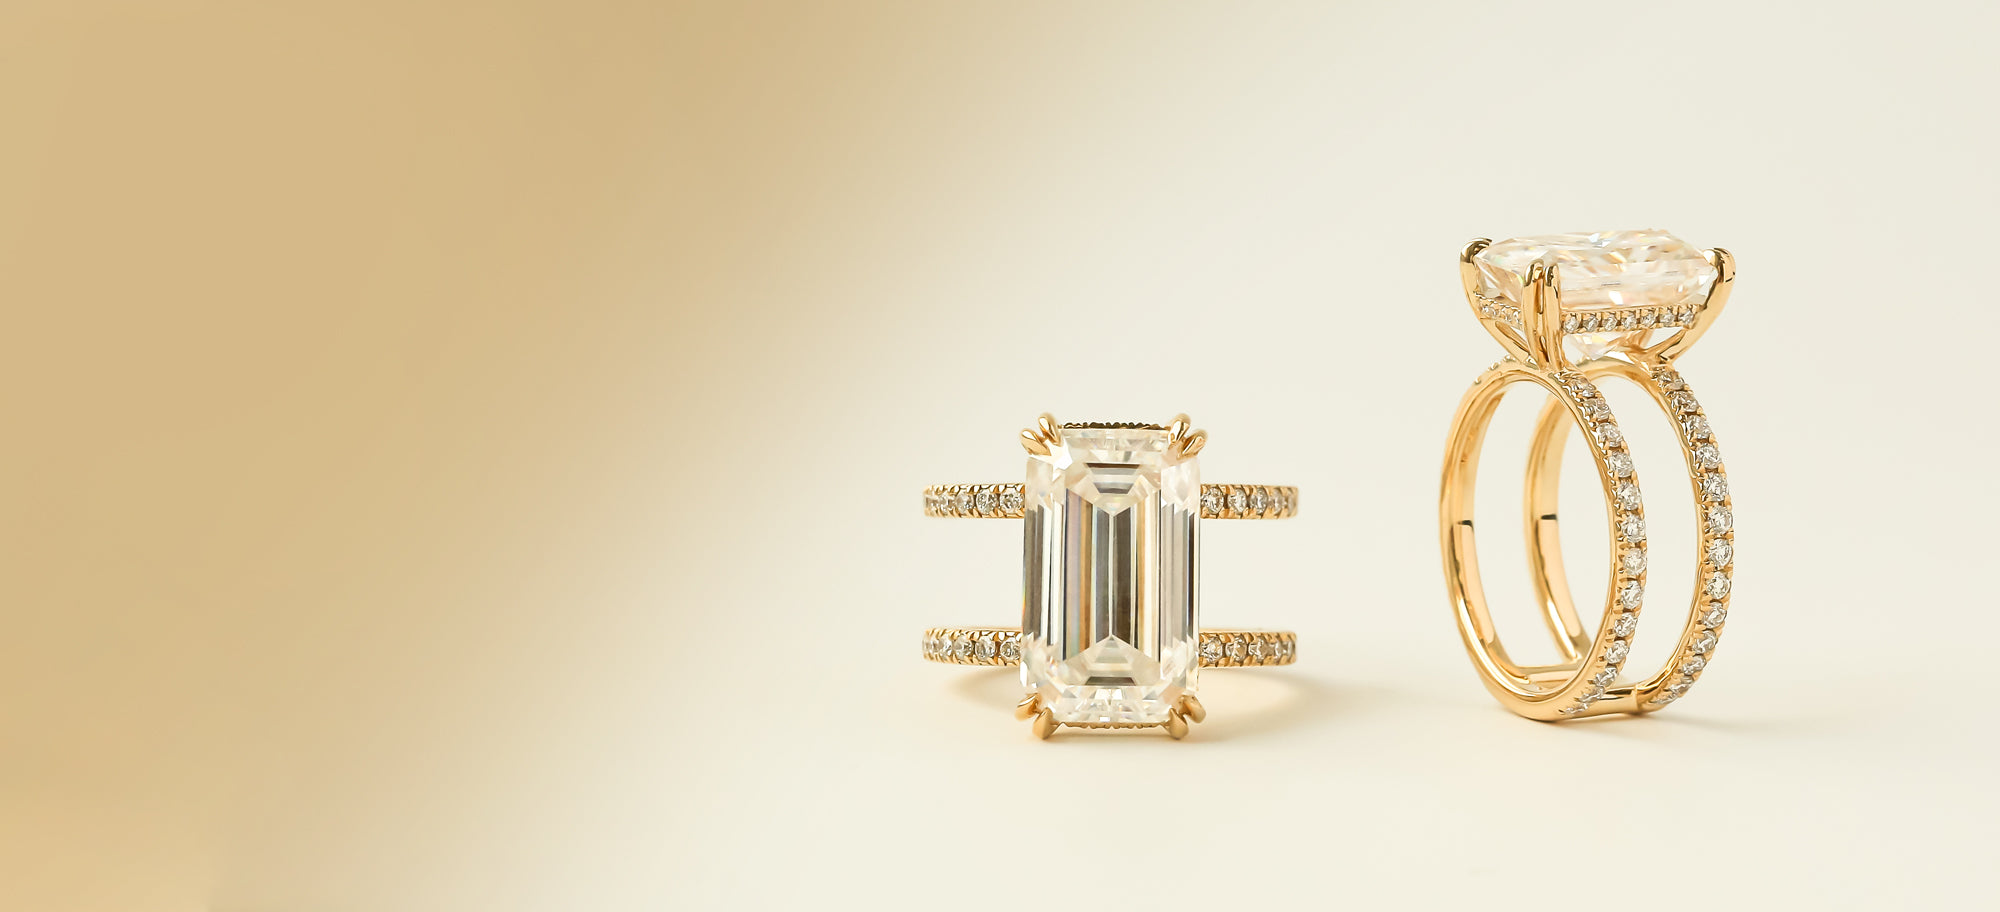 Bario Neal's Stunning Engagement Rings Shine With Traceable, Conflict-Free  Diamonds & Gemstones - The Good Trade